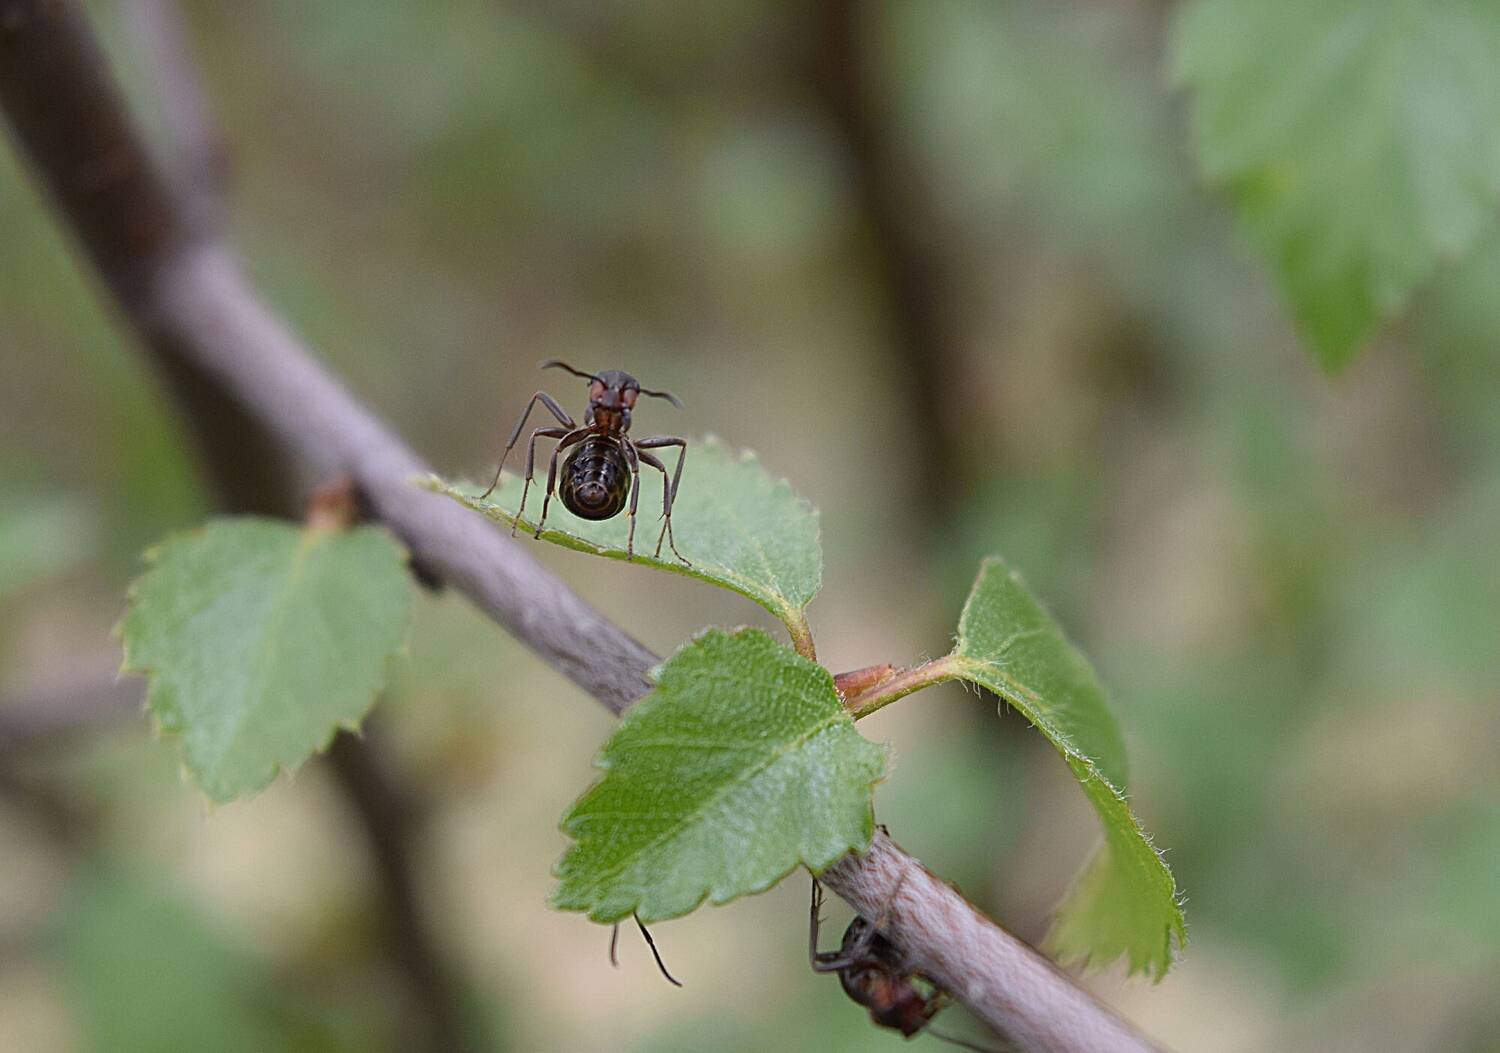 A narrow-headed ant on a small branch of a tree.